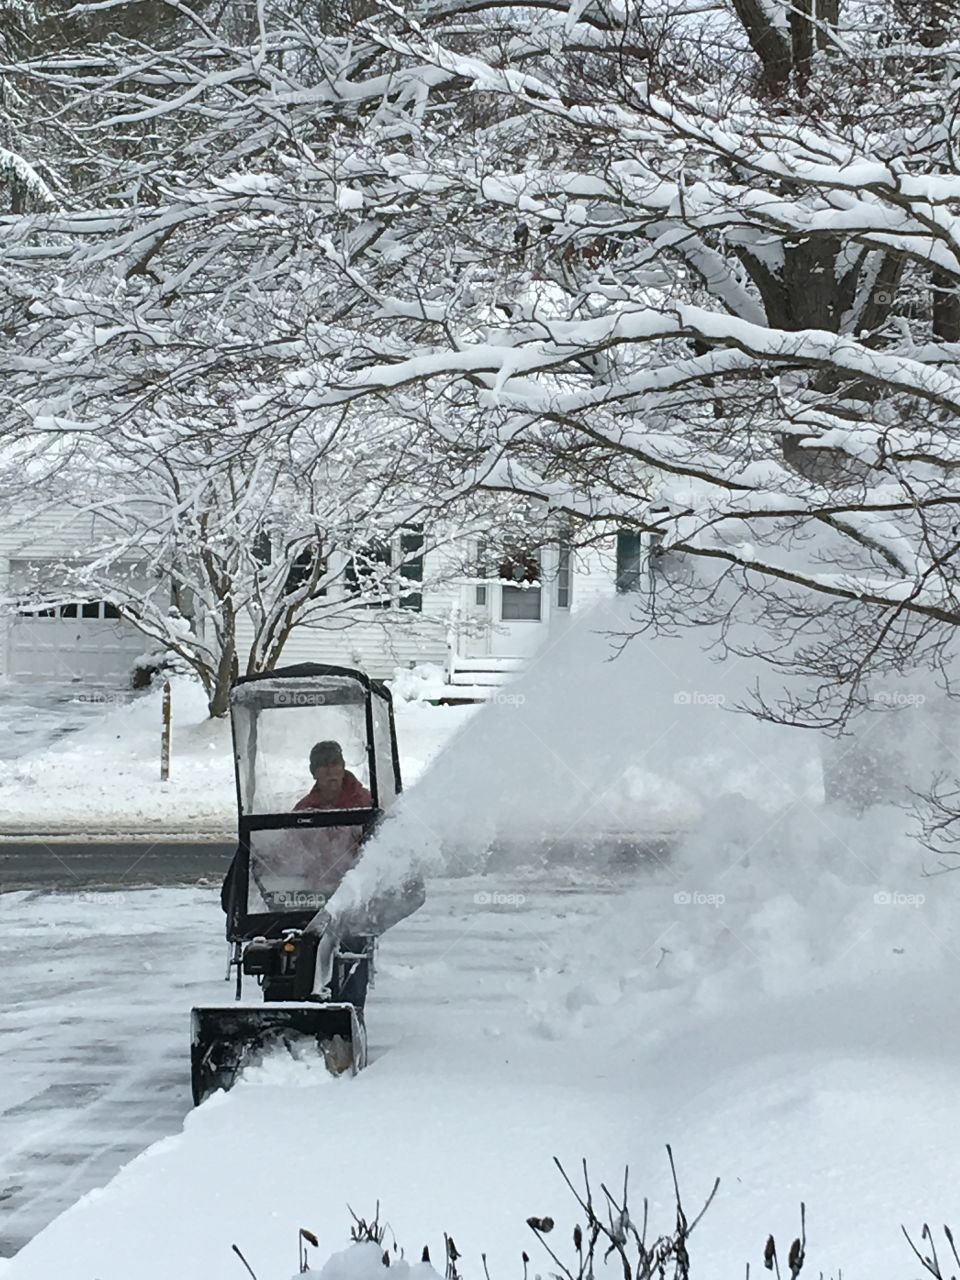 Snowblowing Driveway After Storm Jonas

Whole Easter Seaboard got hit by Storm Jonas. This is a pic of final cleanup in our driveway with our snowblower with an extra attached protector around it. Takes hours to do our driveways. Hubby dresses for it, no problem!